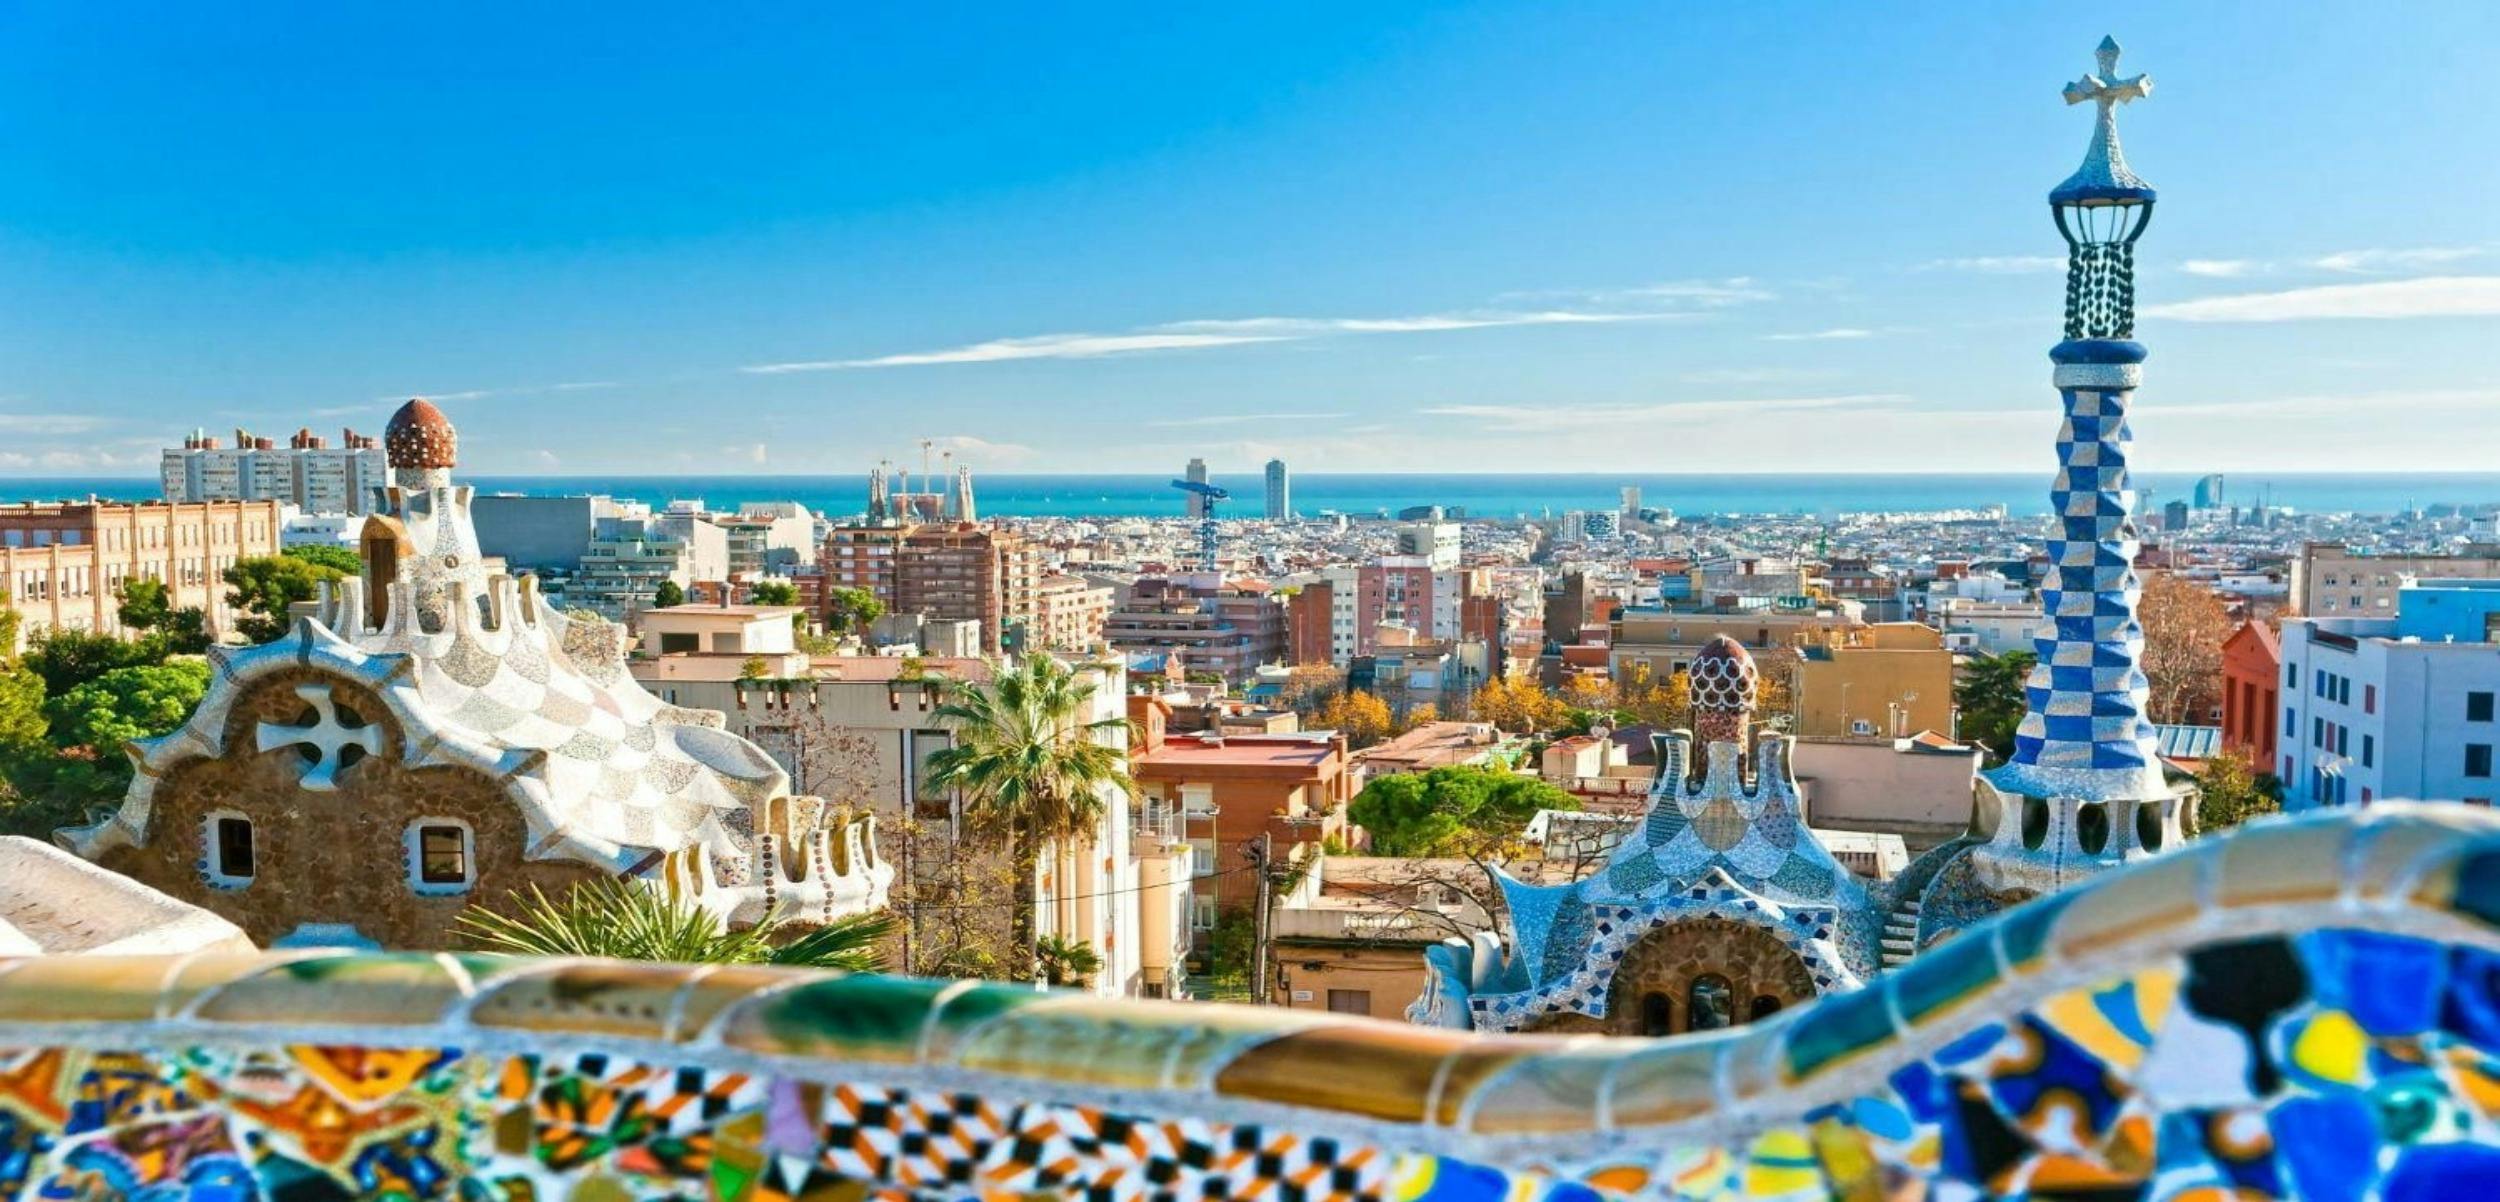 Sagrada Familia, Park Guell and and Old Town tour